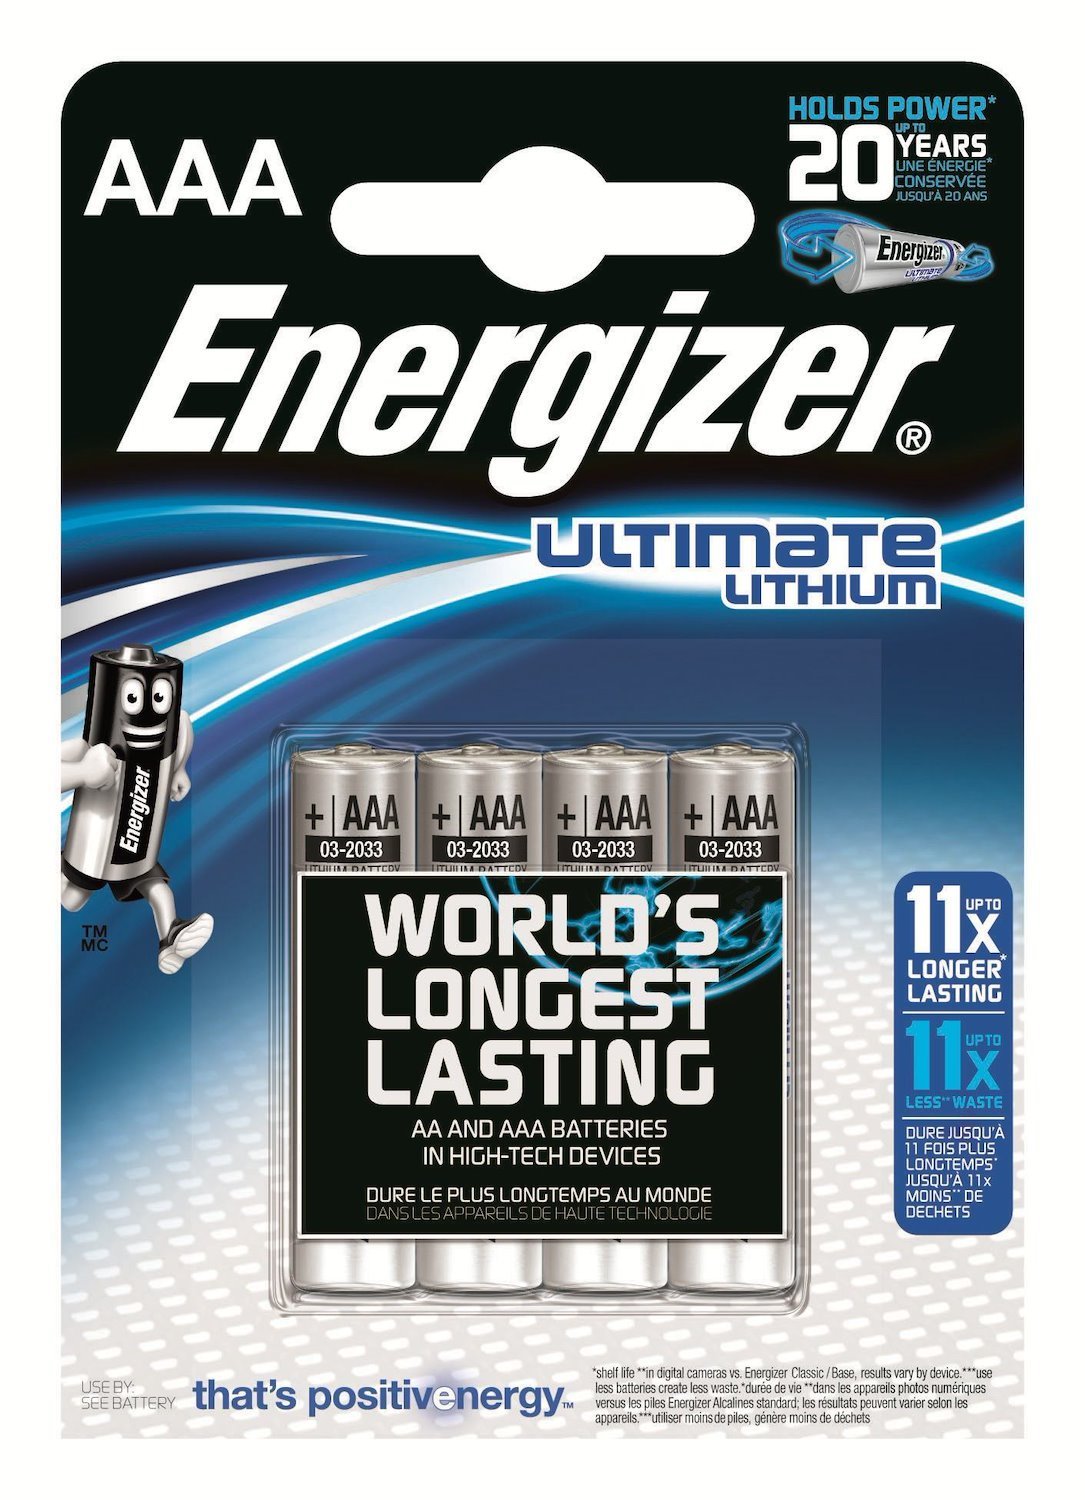 Energizer Enlithiumaaap4 (1X4 Energizer Ultimate Lithium - Micro Aaa LR 03 1 5V - Warranty: 12M)